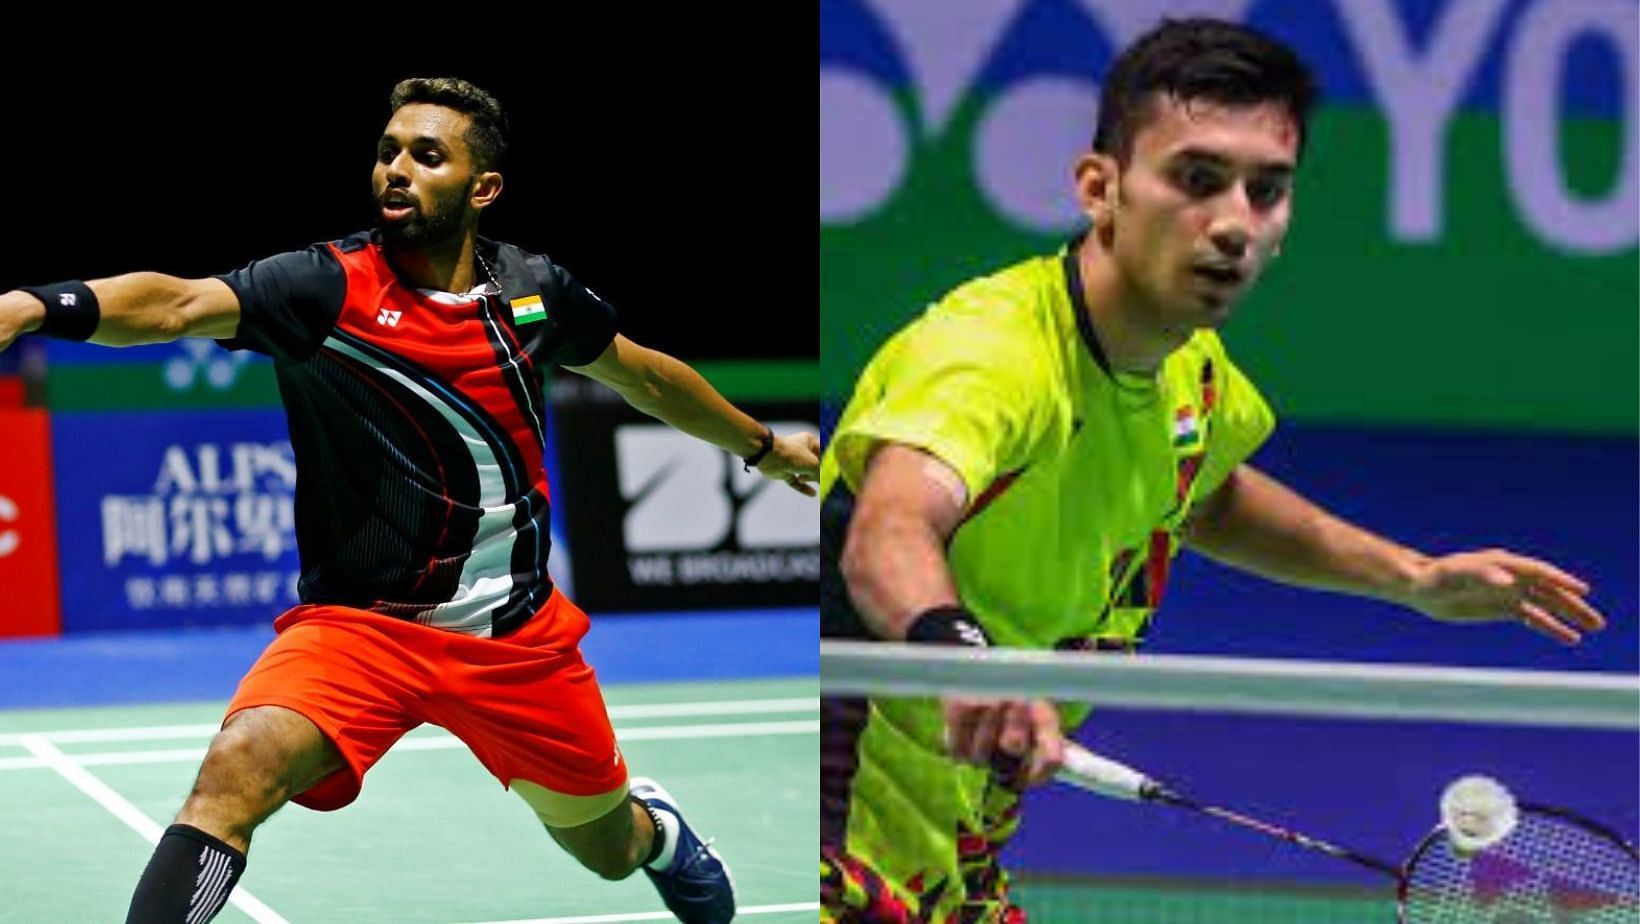 HS Prannoy and Lakhys Sen have withdrawn from the Syed Modi International